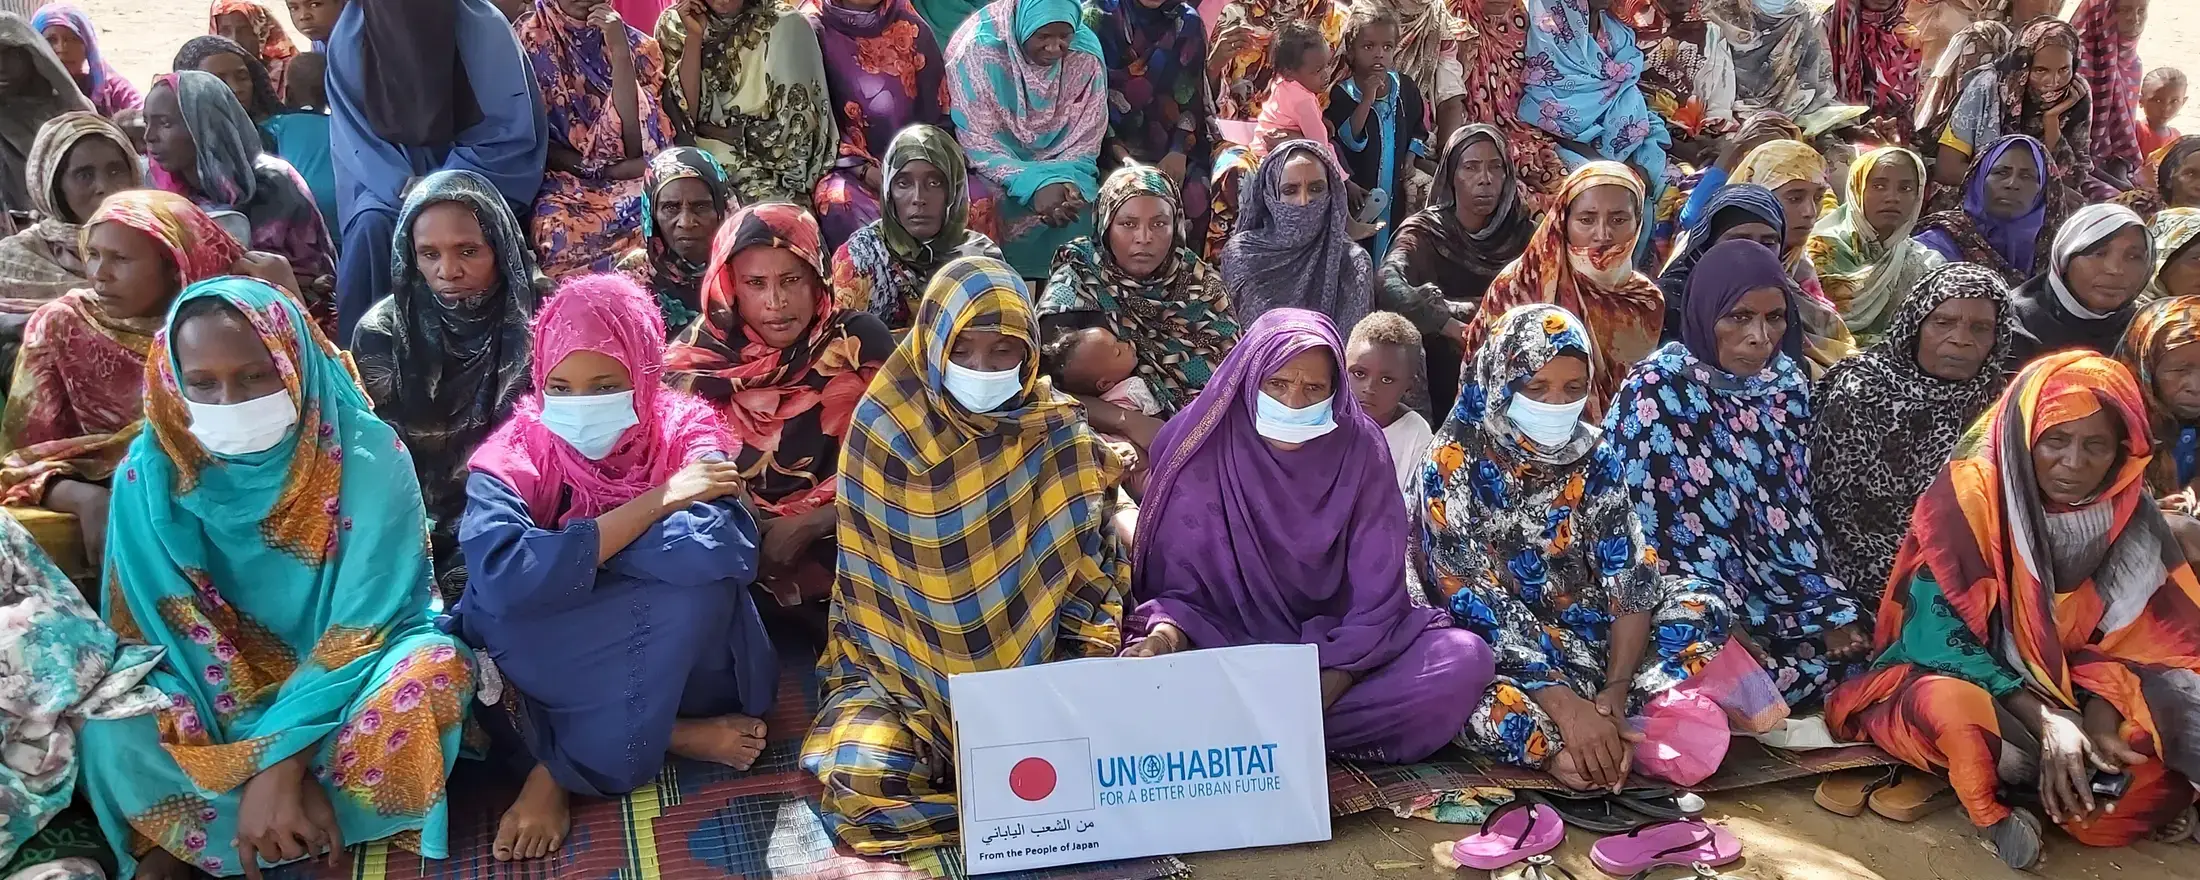 The community of Um Ganah Darfur, Sudan, celebrate the launch of the UN-Habitat project funded by the Government of Japan. The project will benefit some 17,000 returned Internal Displaced Persons (IDPs) and host communities 